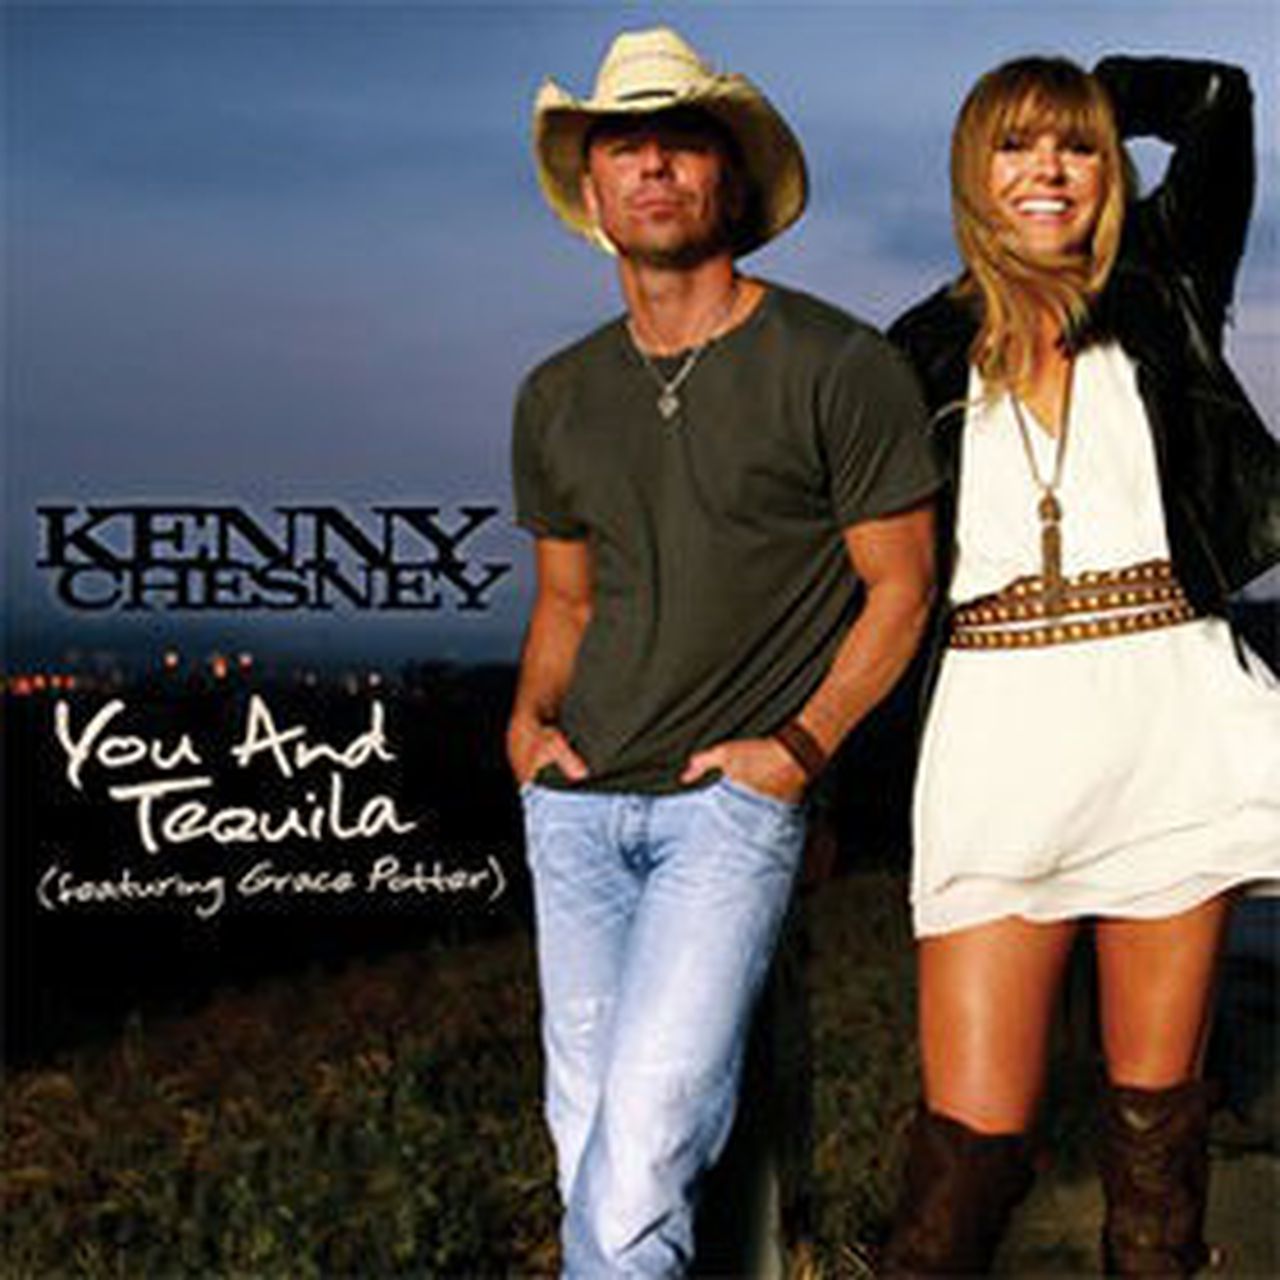 Kenny Chesney – You and Tequila (ft. Grace Potter)